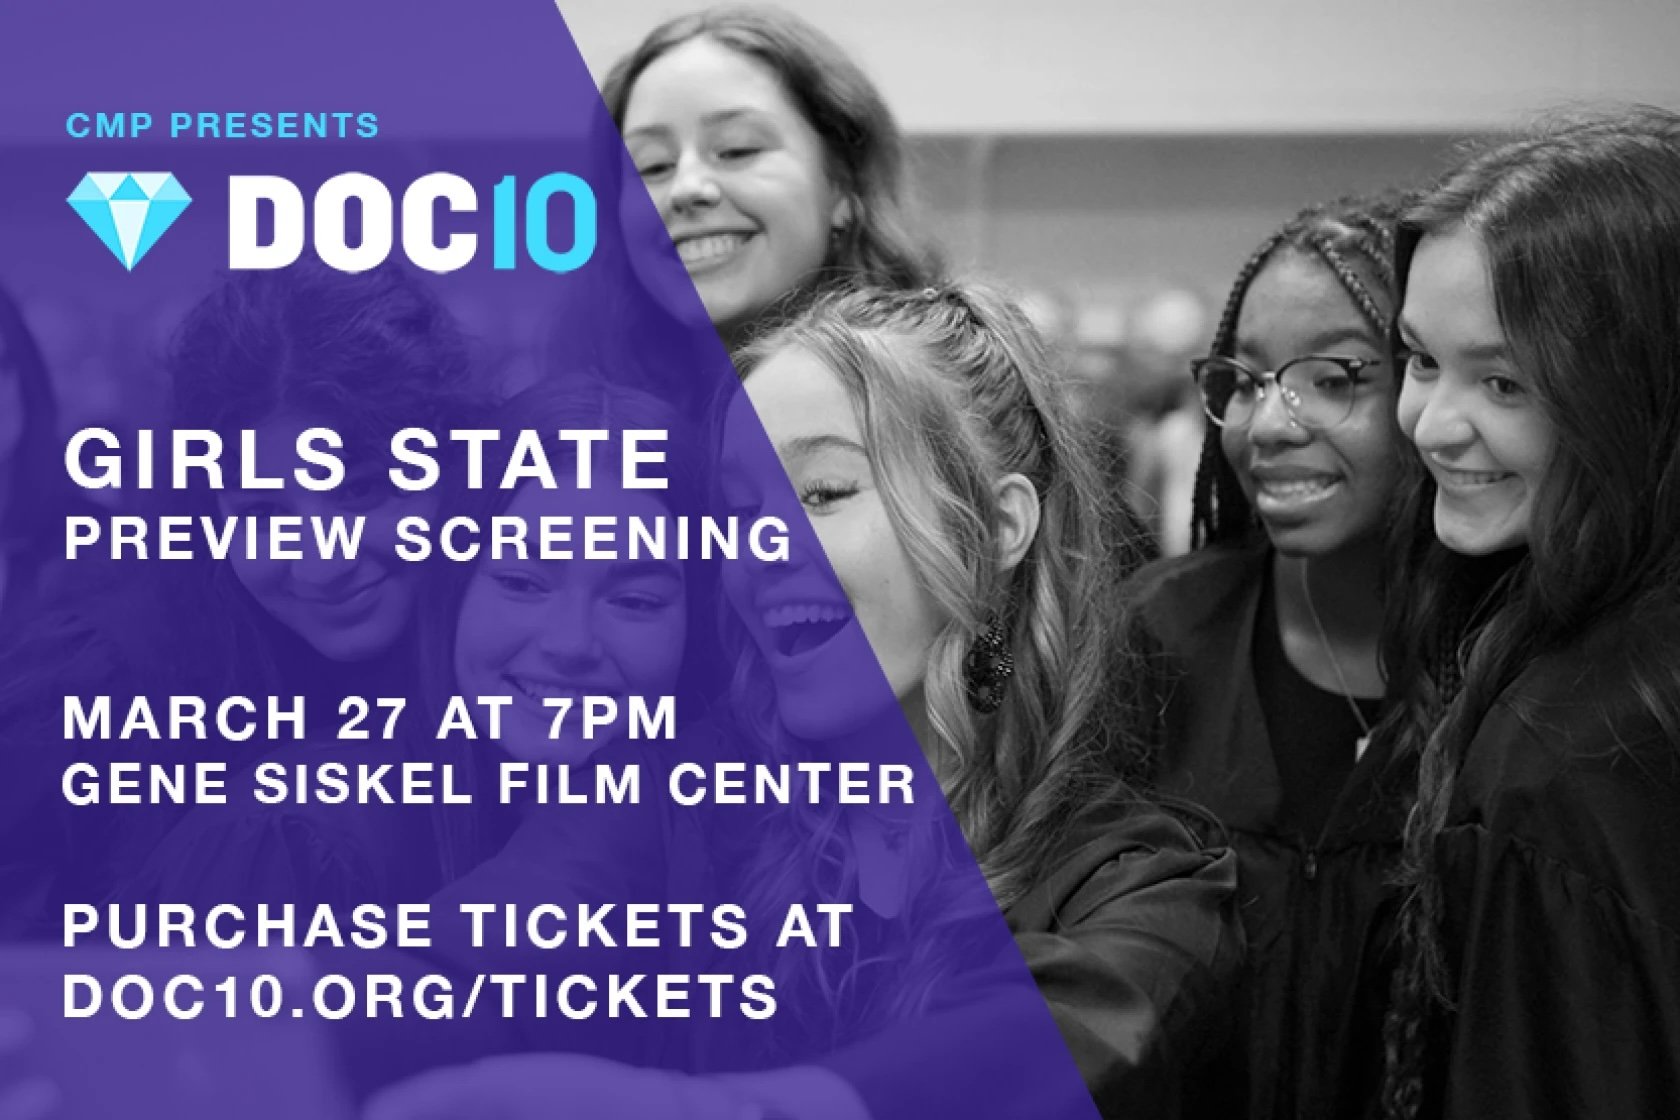 Chicago Sun Times -- GIRLS STATE Doc10 Preview Screening